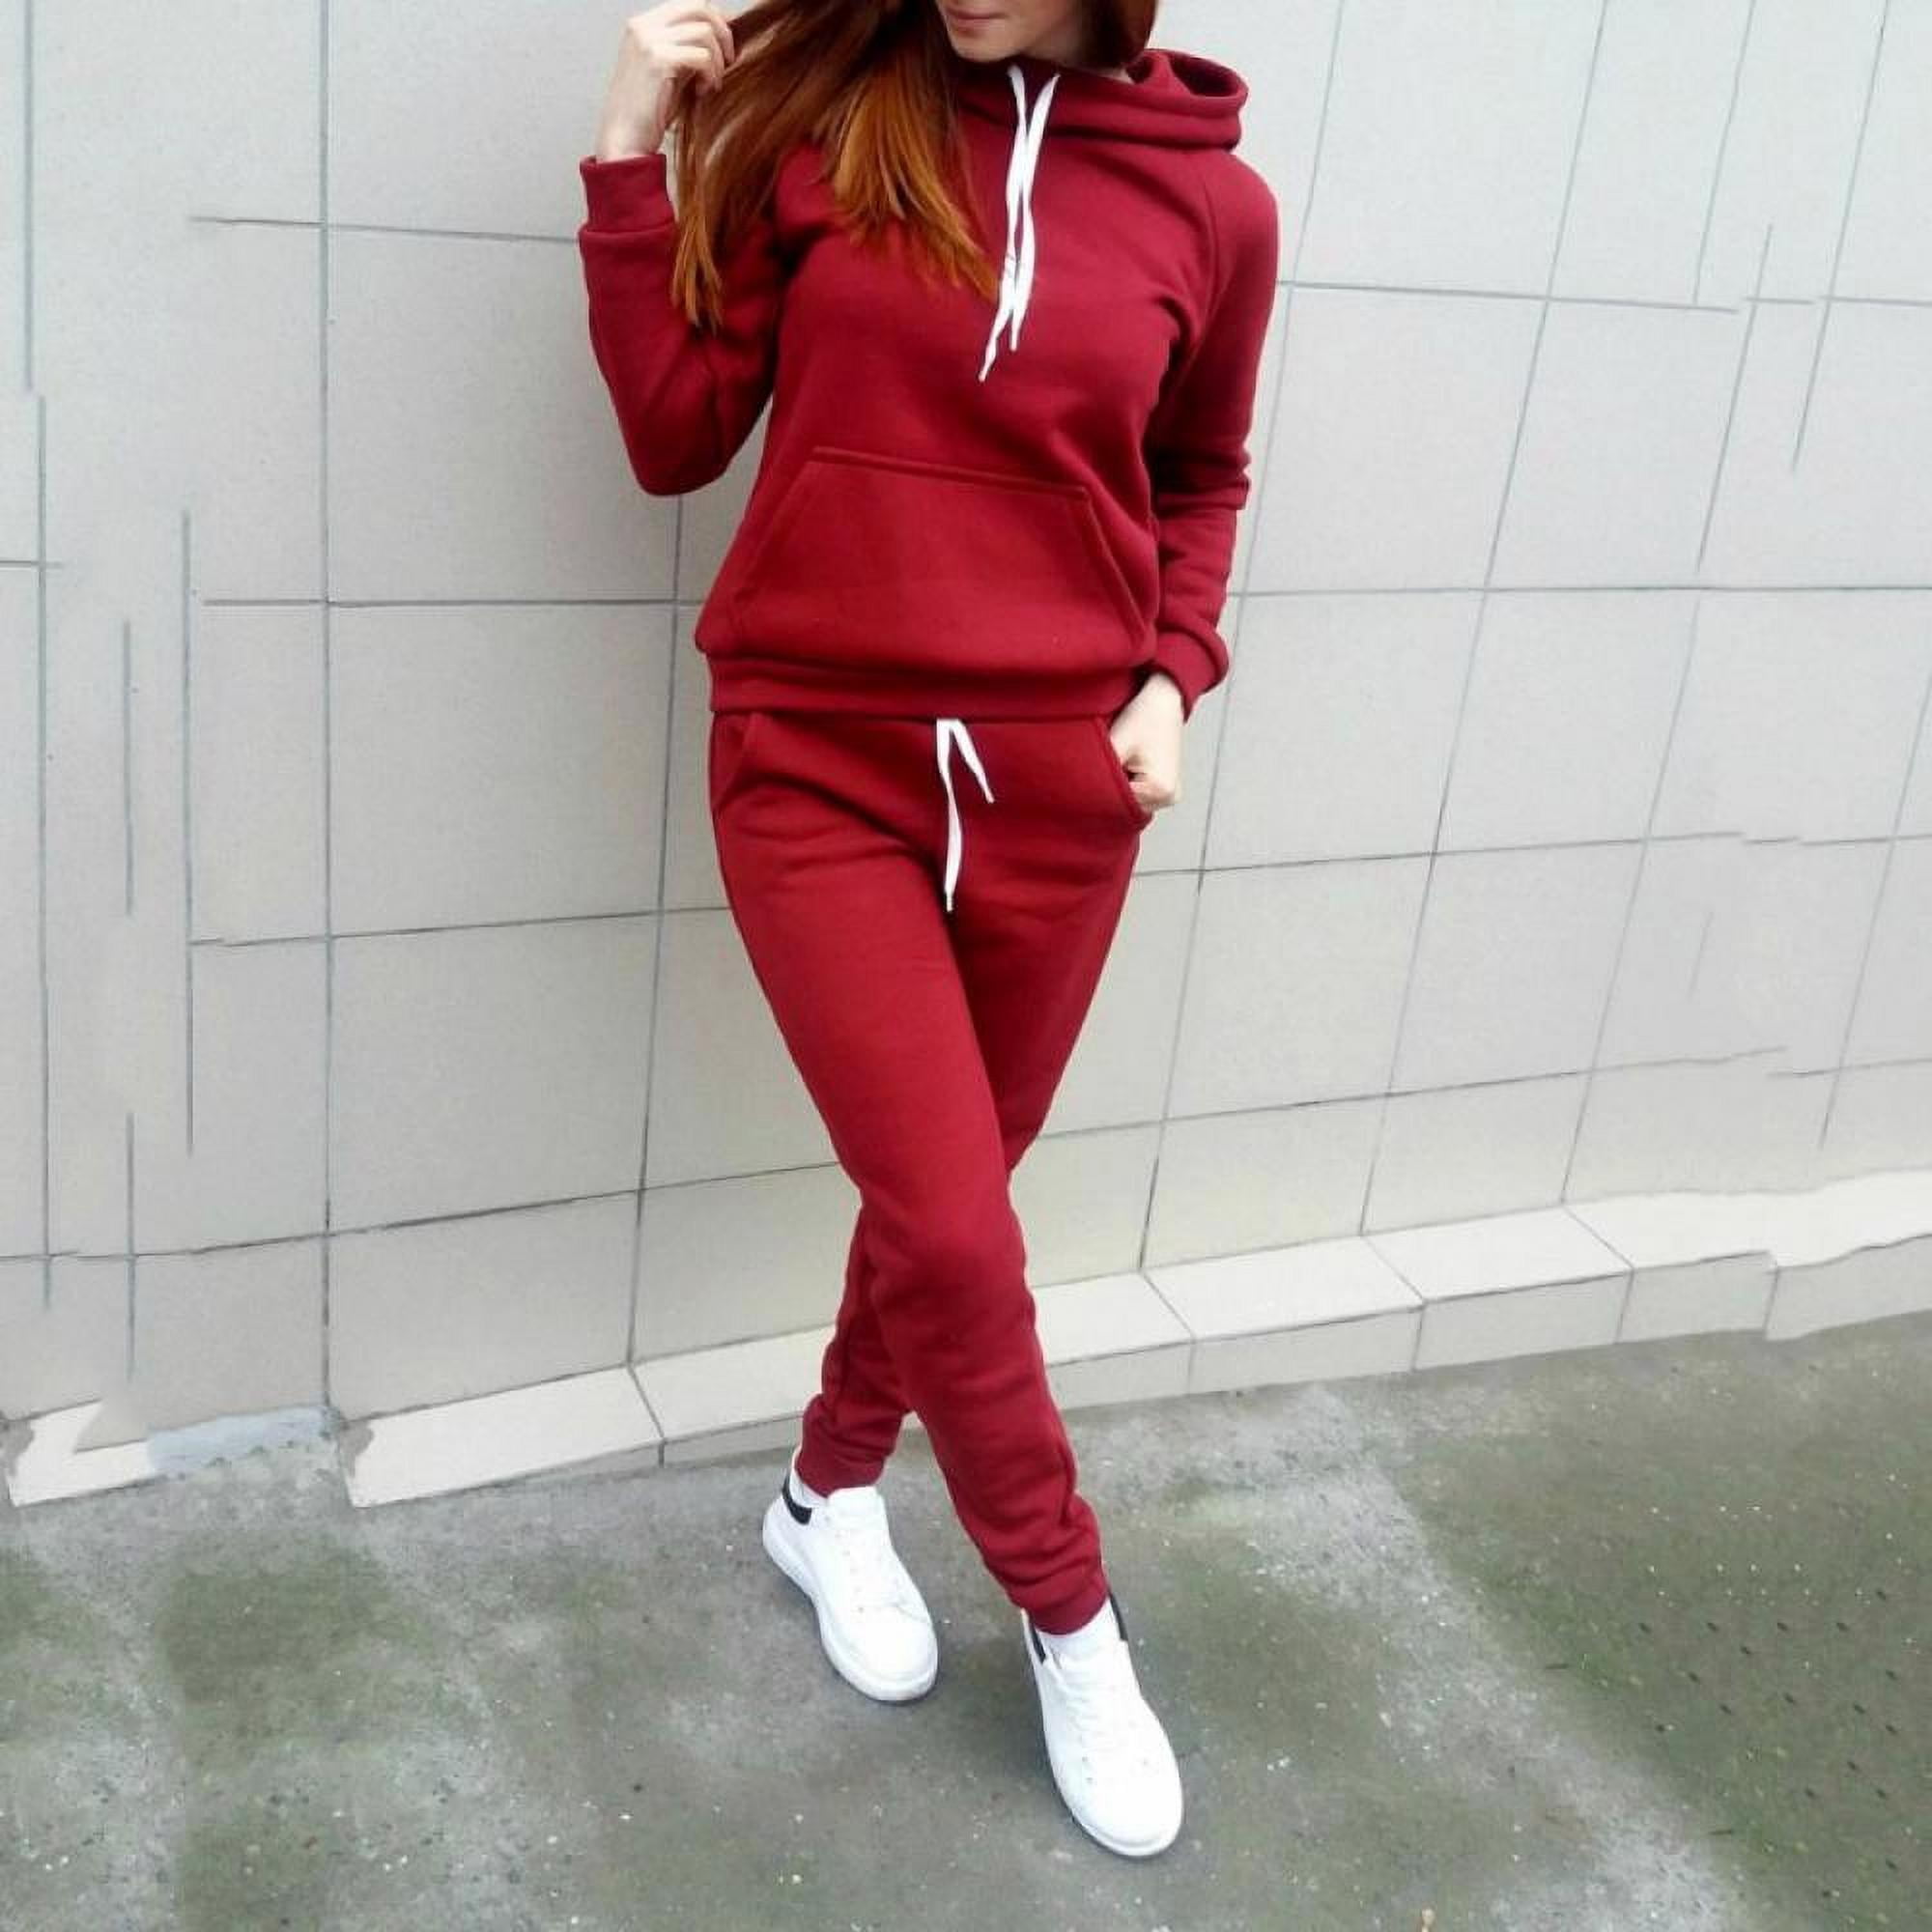 Zonghan Fashion Women Autumn Winter Jogging Suits Sport Suit Hooded Sweater  Fleece Training Running Sport Clothes Tracksuit Long Sleeve Heaps Collar